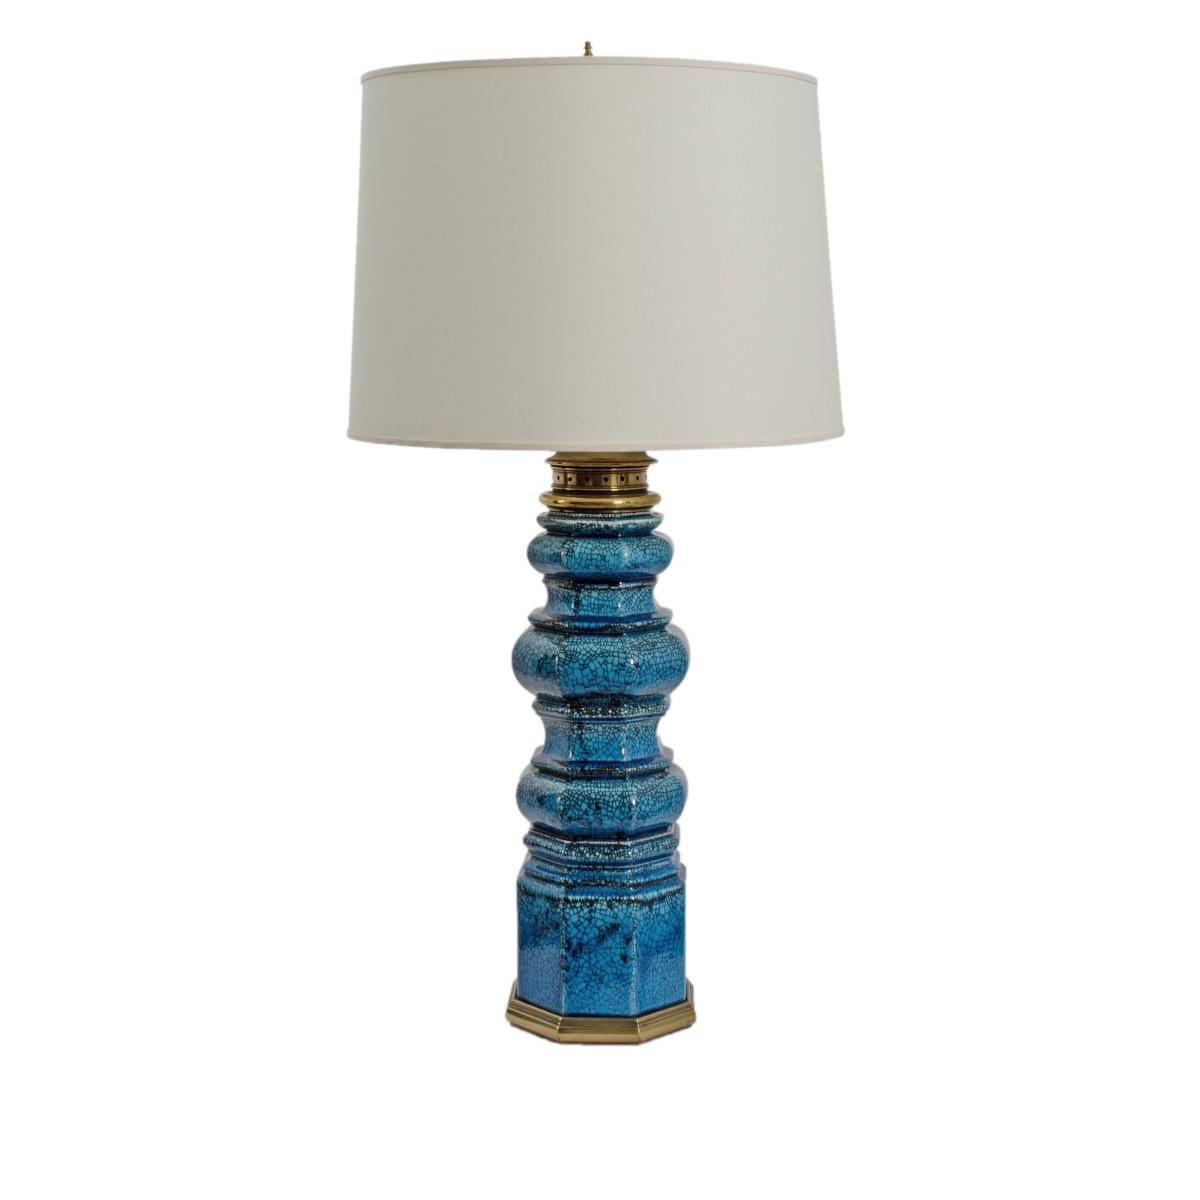 A pair of blue crackle glaze ceramic tall table lamps on brass base by Stiffel, USA, circa 1960.

Includes custom drum shades.

Wired for USA, each lamp takes a standard bulb, 75 watts max.
  